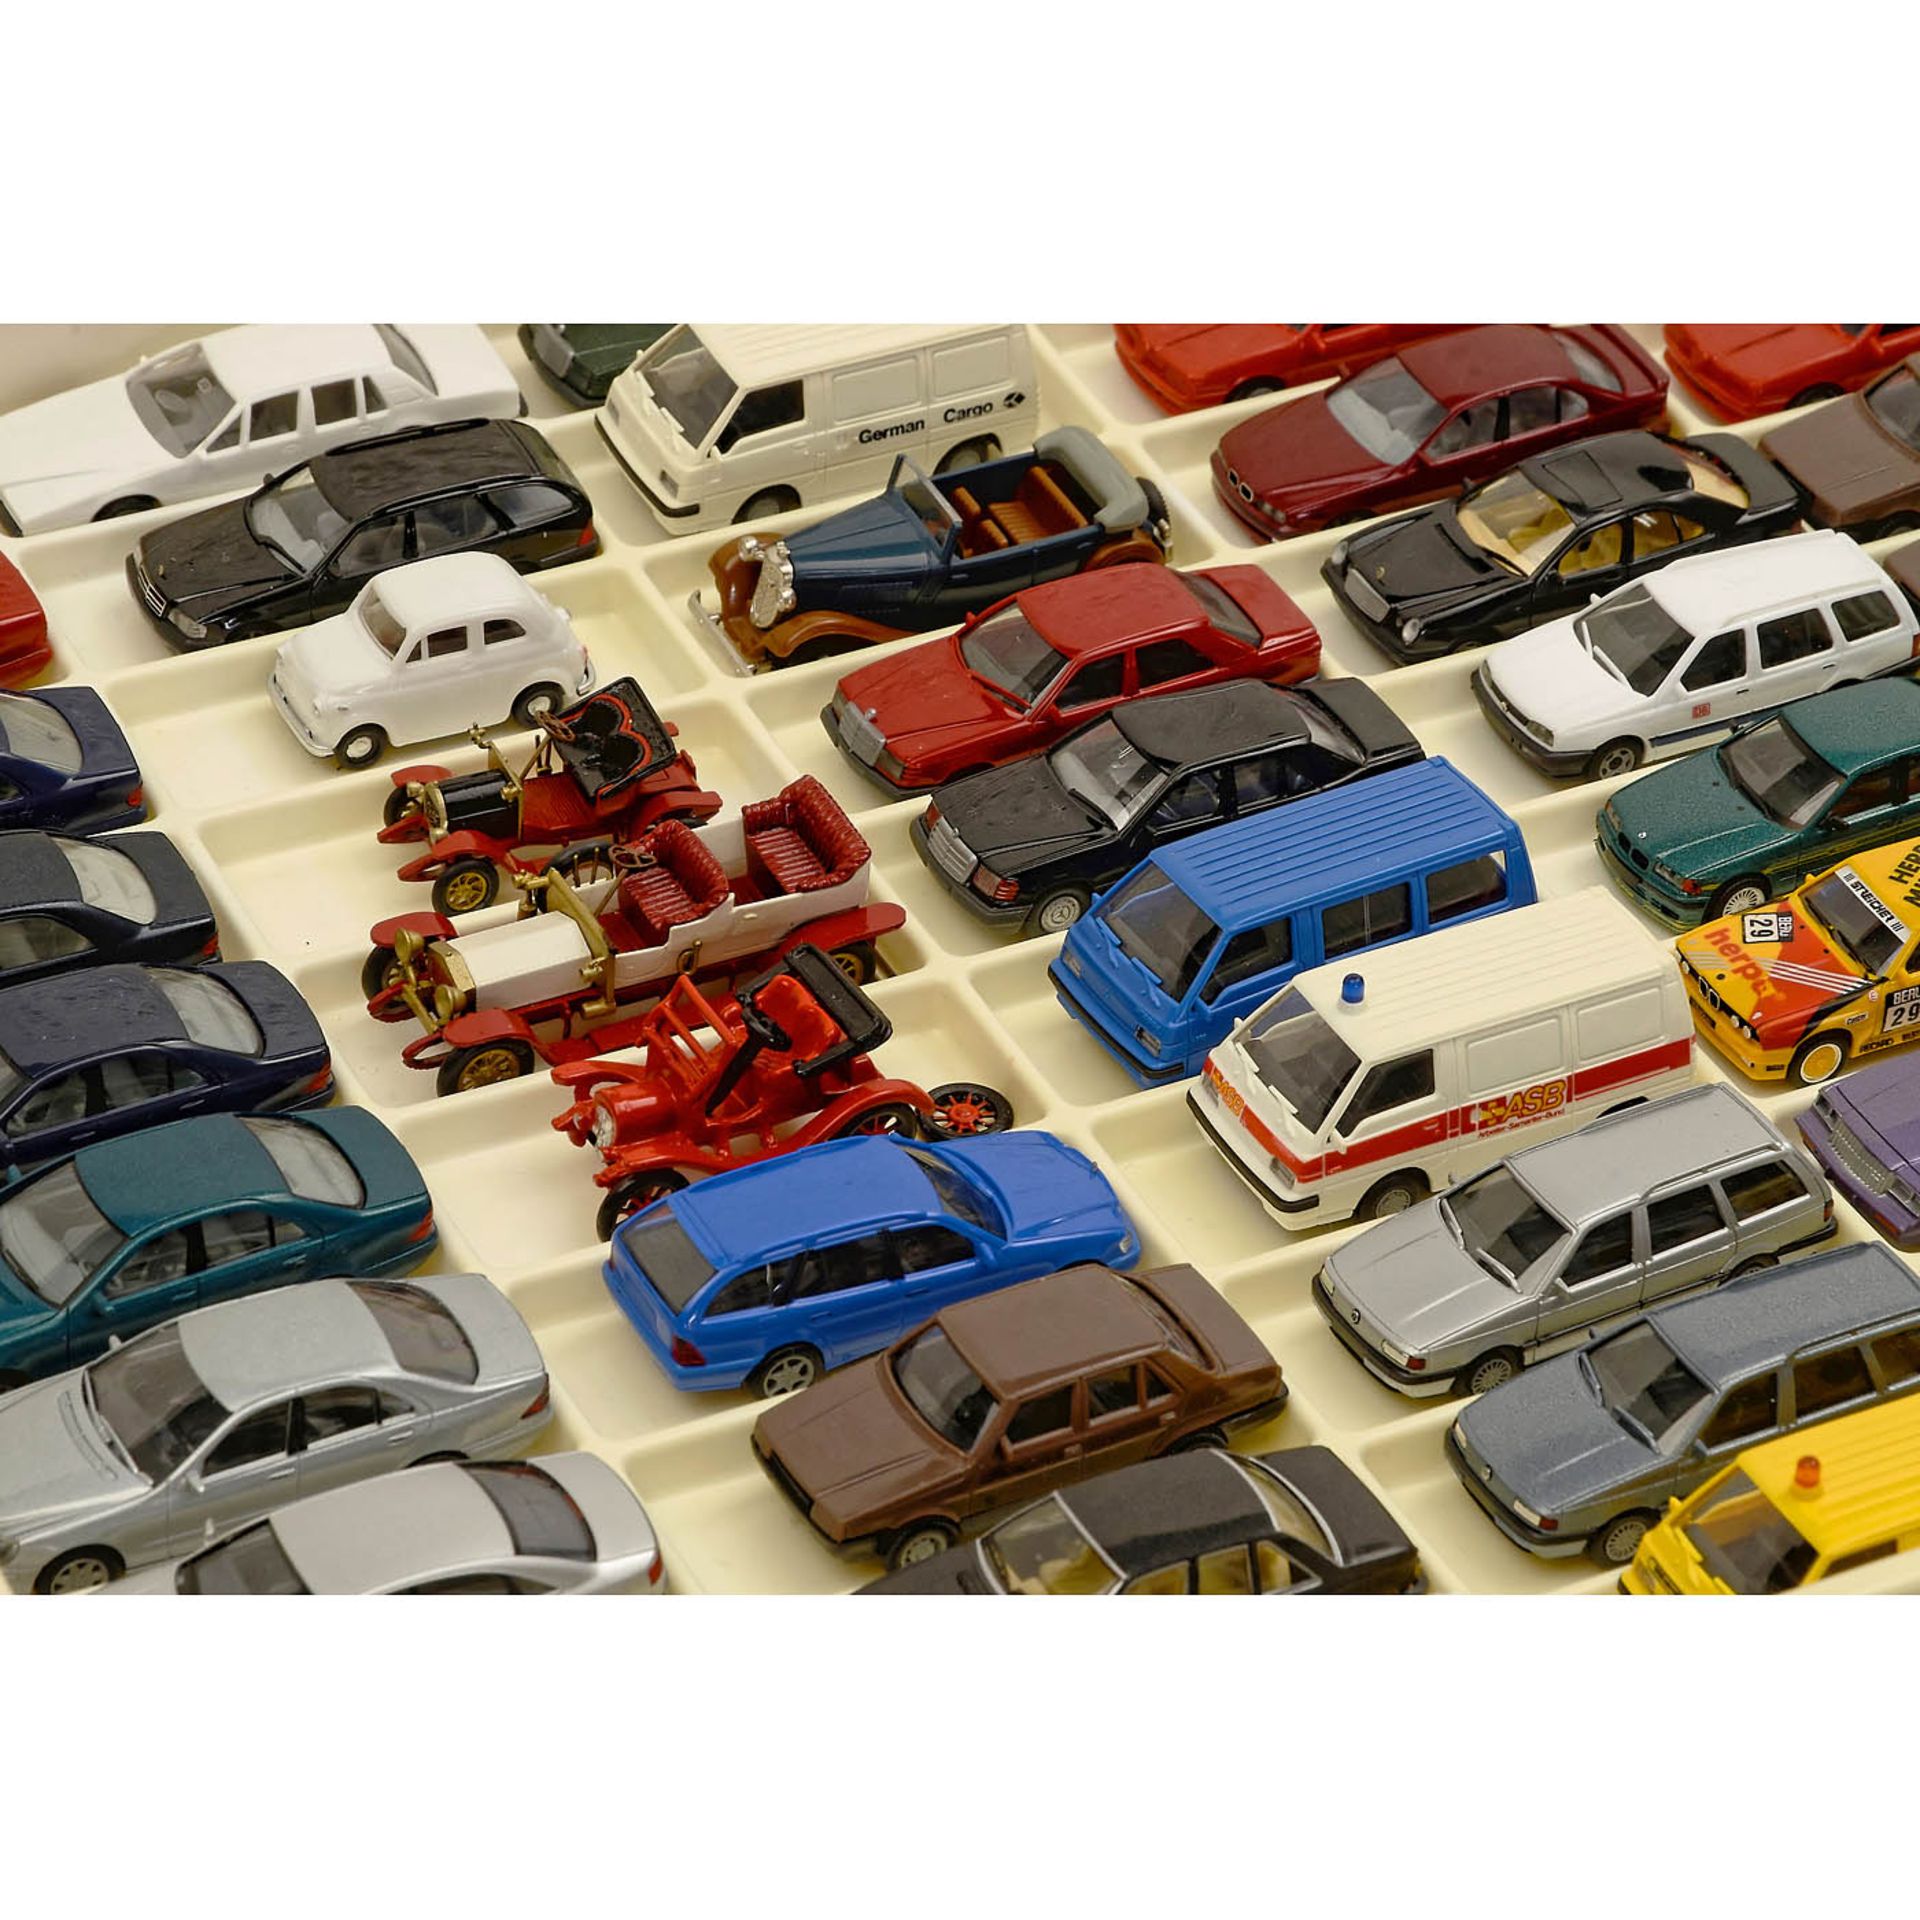 Large Collection of 1:87 Scale Model Cars - Image 7 of 9